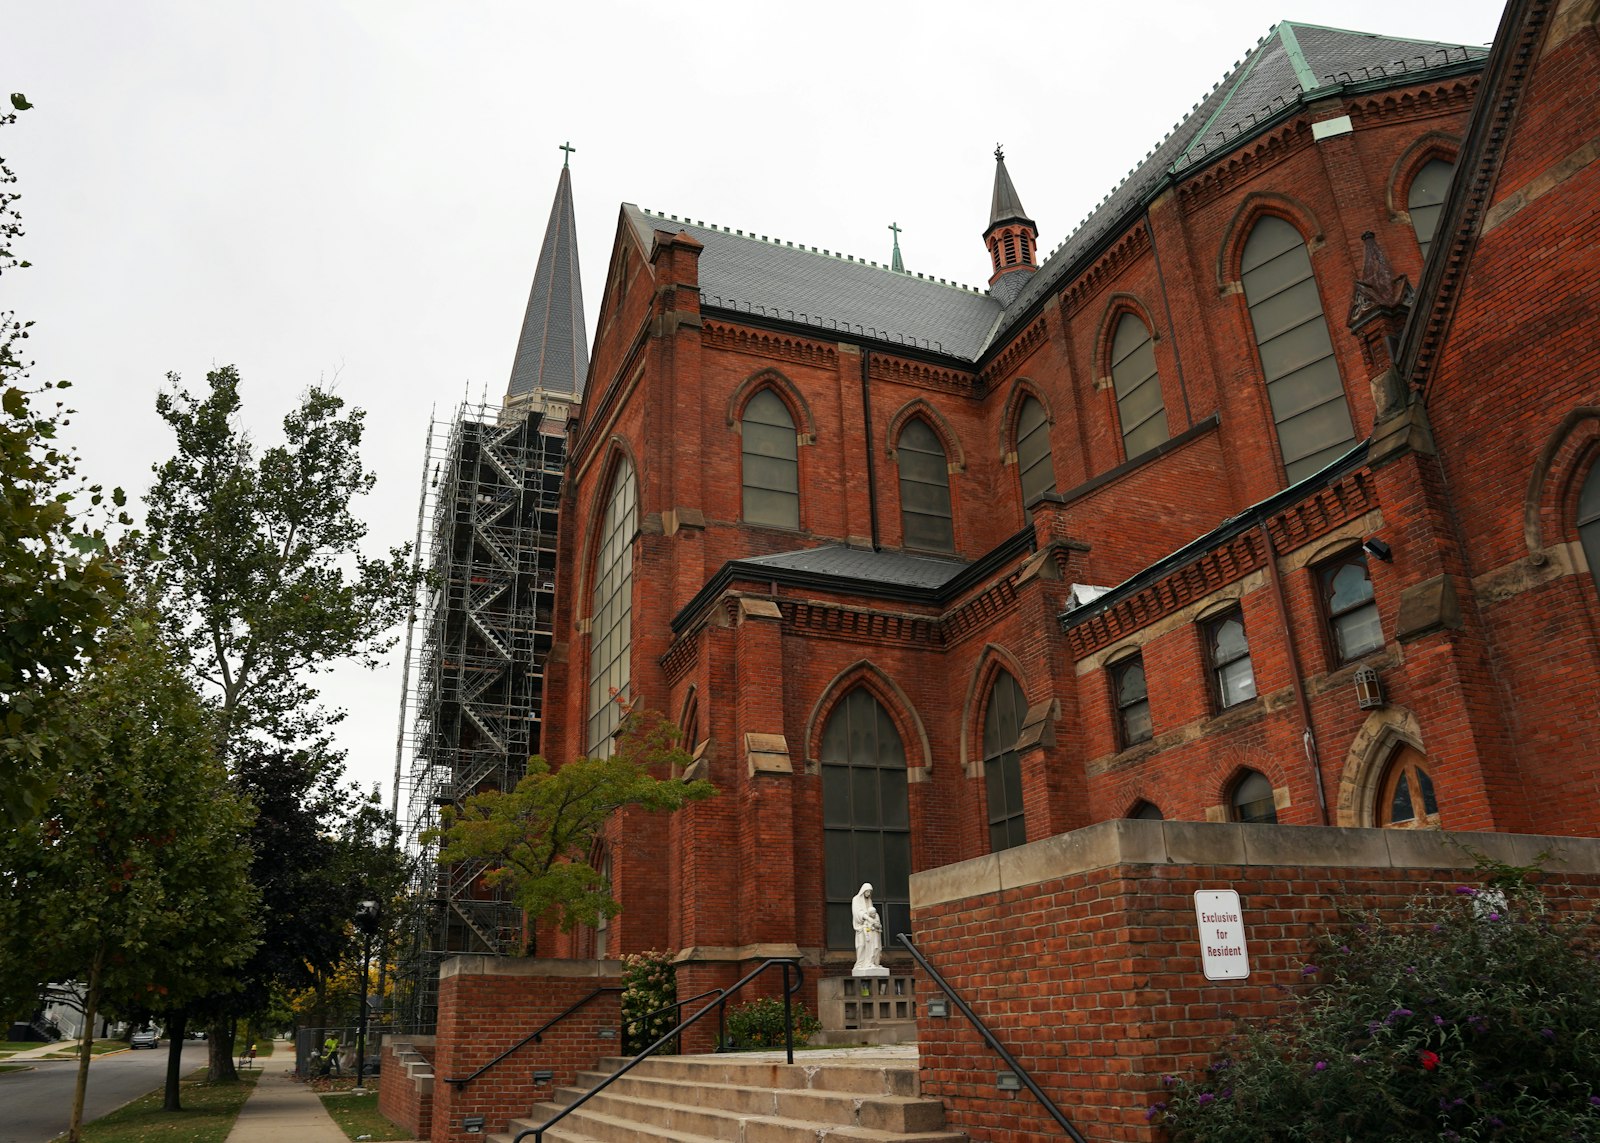 Fundraising and planning for renovations on the 137-year-old structure began before COVID-19, but the pandemic slowed down the efforts to raise the necessary funds for the multi-million dollar repairs, which include the steeples and the roof.